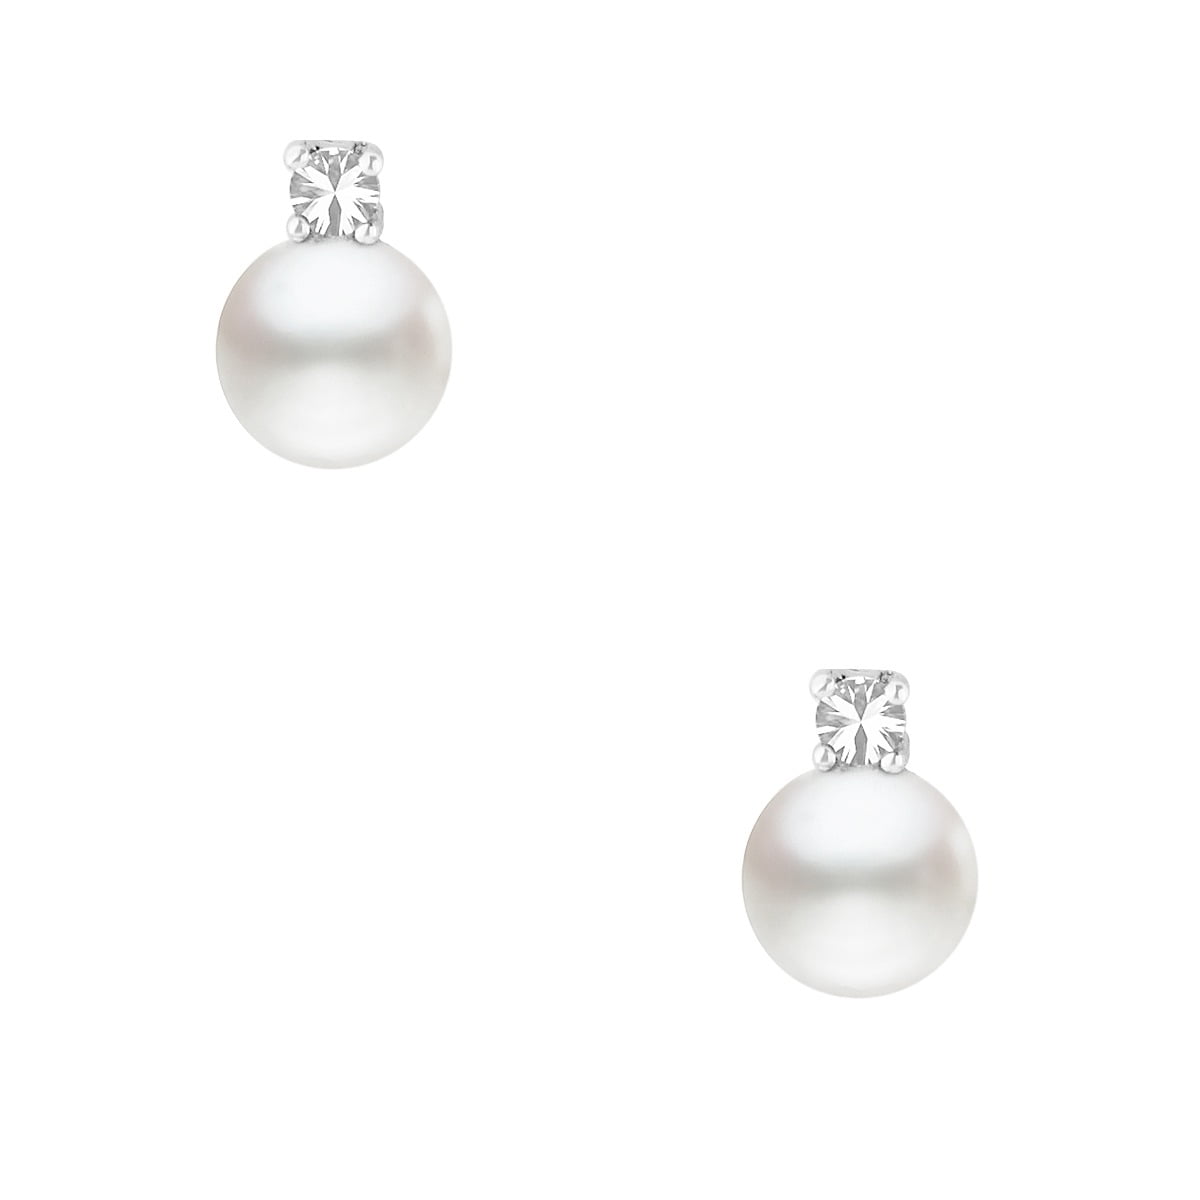 Earrings of silver 925°, with white synthetic pearl 8 mm, with single stone zirconi, with pin clasp.